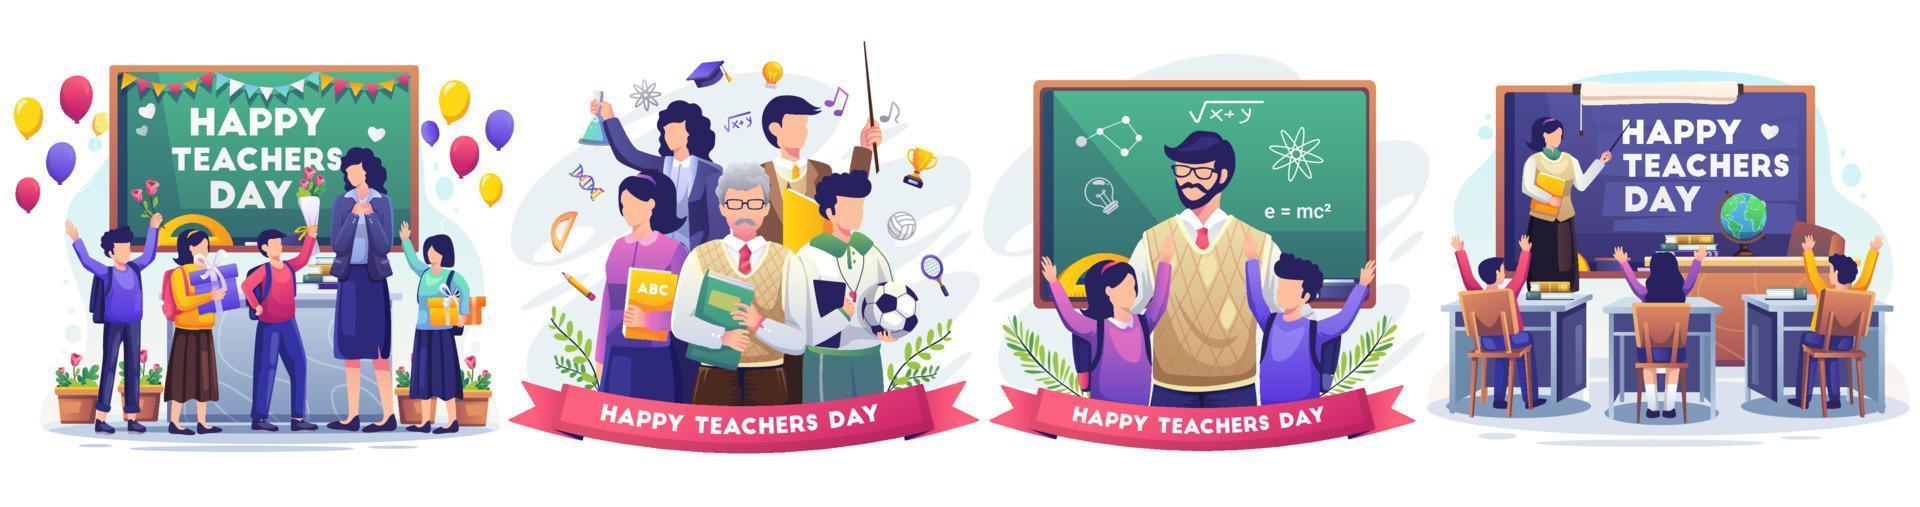 Set of Happy Teacher's Day with teacher and students celebrates Teacher's Day. Flat style vector illustration